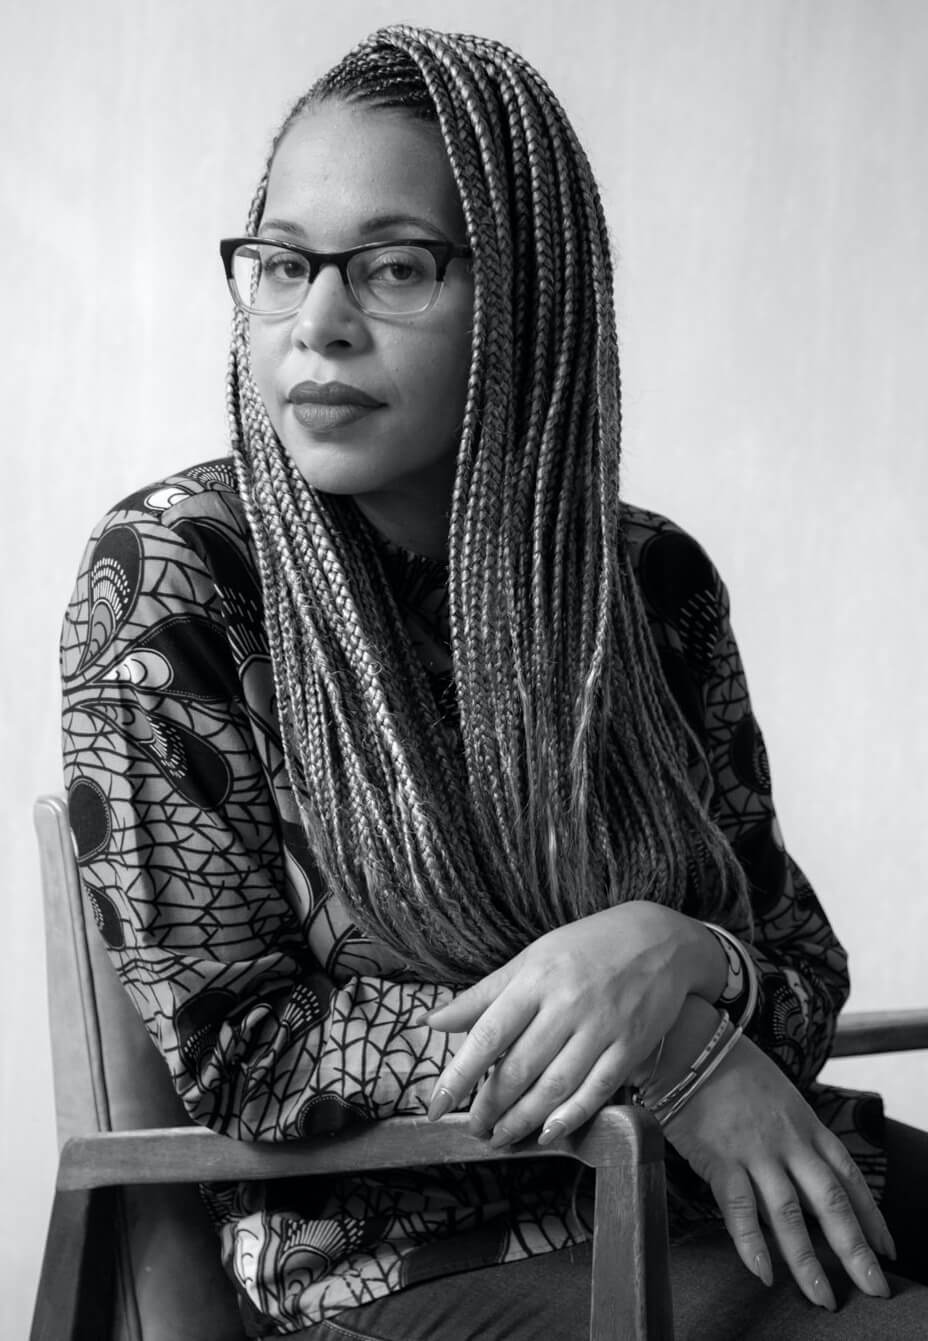 Loira Limbal is sitting in a chair, she looks at the camera with her head slightly turned. Loira wears lipstick and her hair is braided. Portrait in black and white.